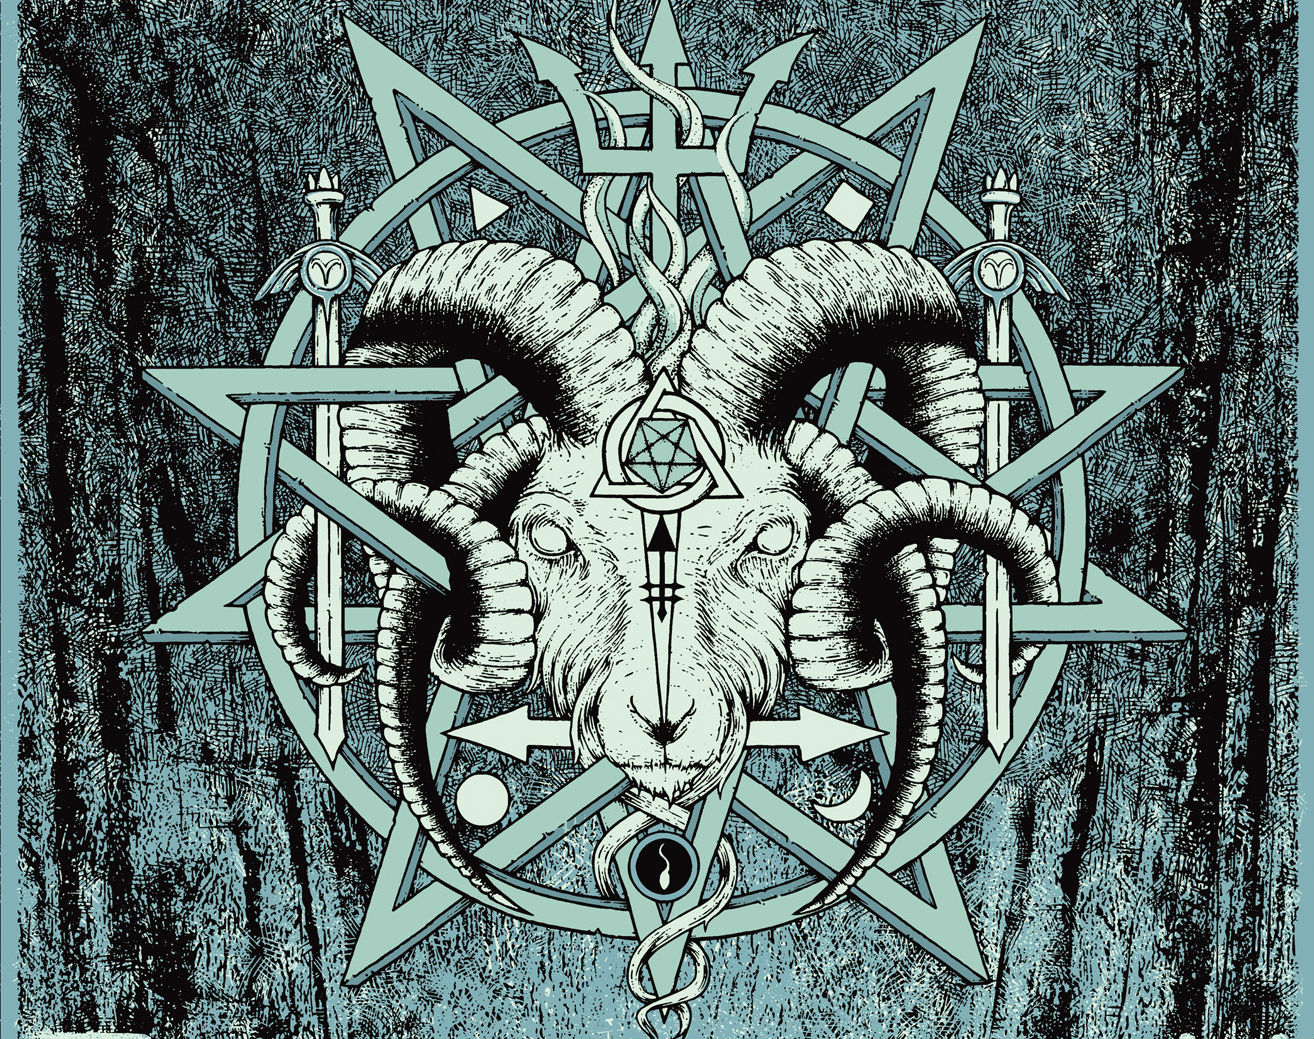 satanic, baphomet, pagan, demon, occult, music, unearthly trance wallpaper for mobile